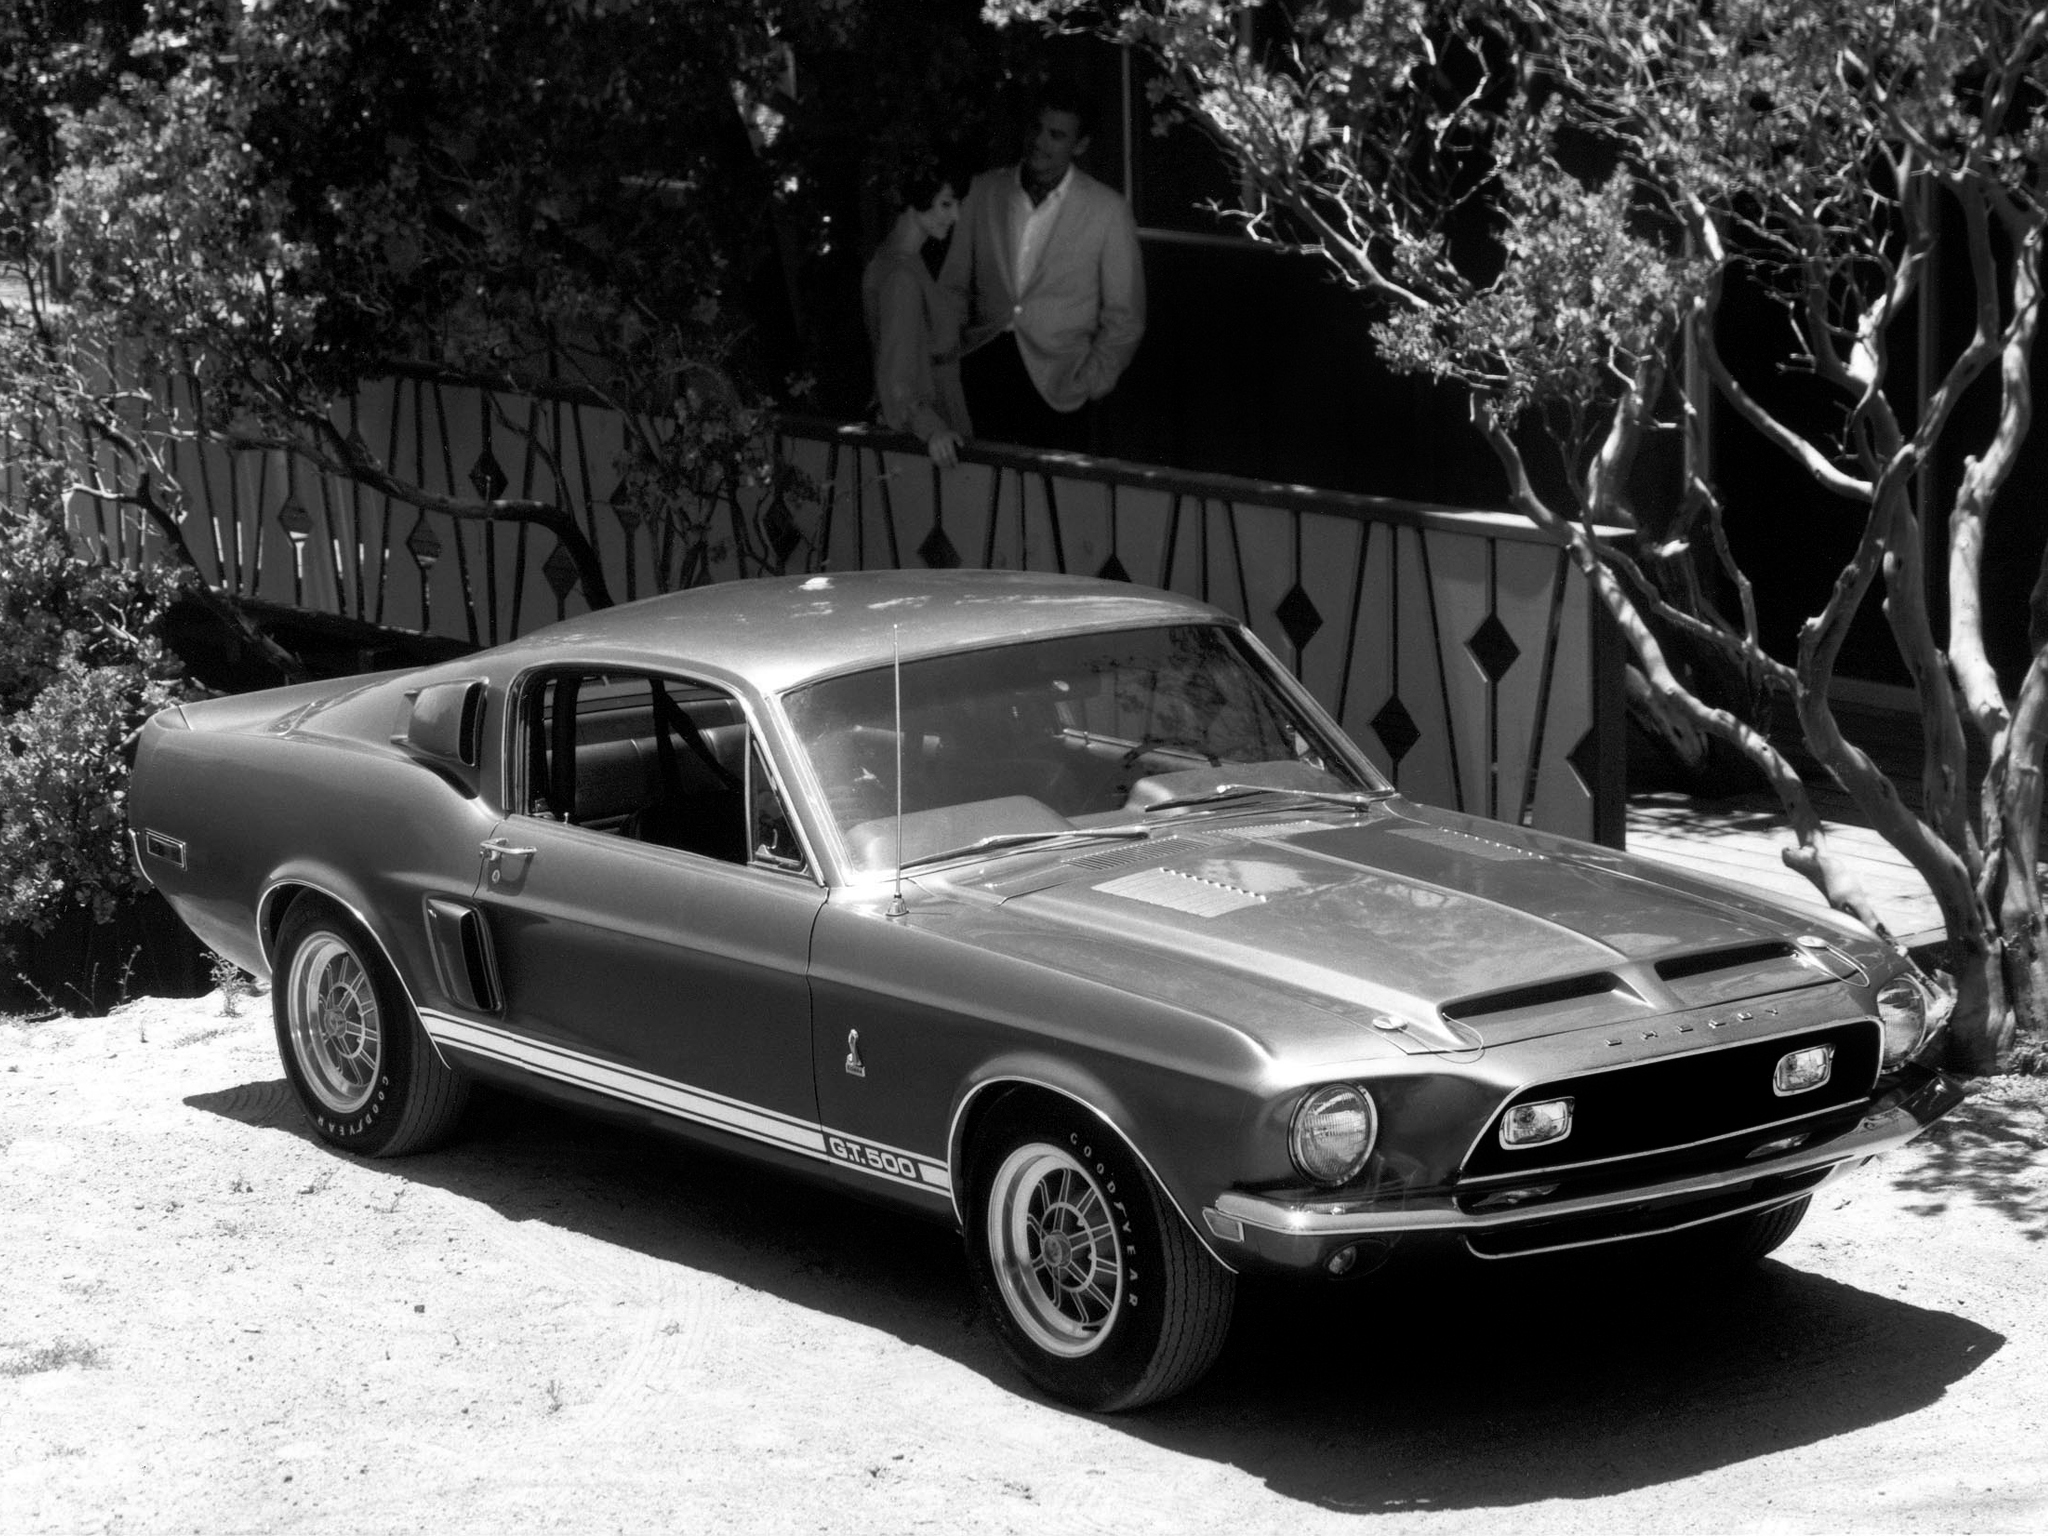 1968, Shelby, Gt500, Ford, Mustang, Classic, Muscle, B w Wallpaper